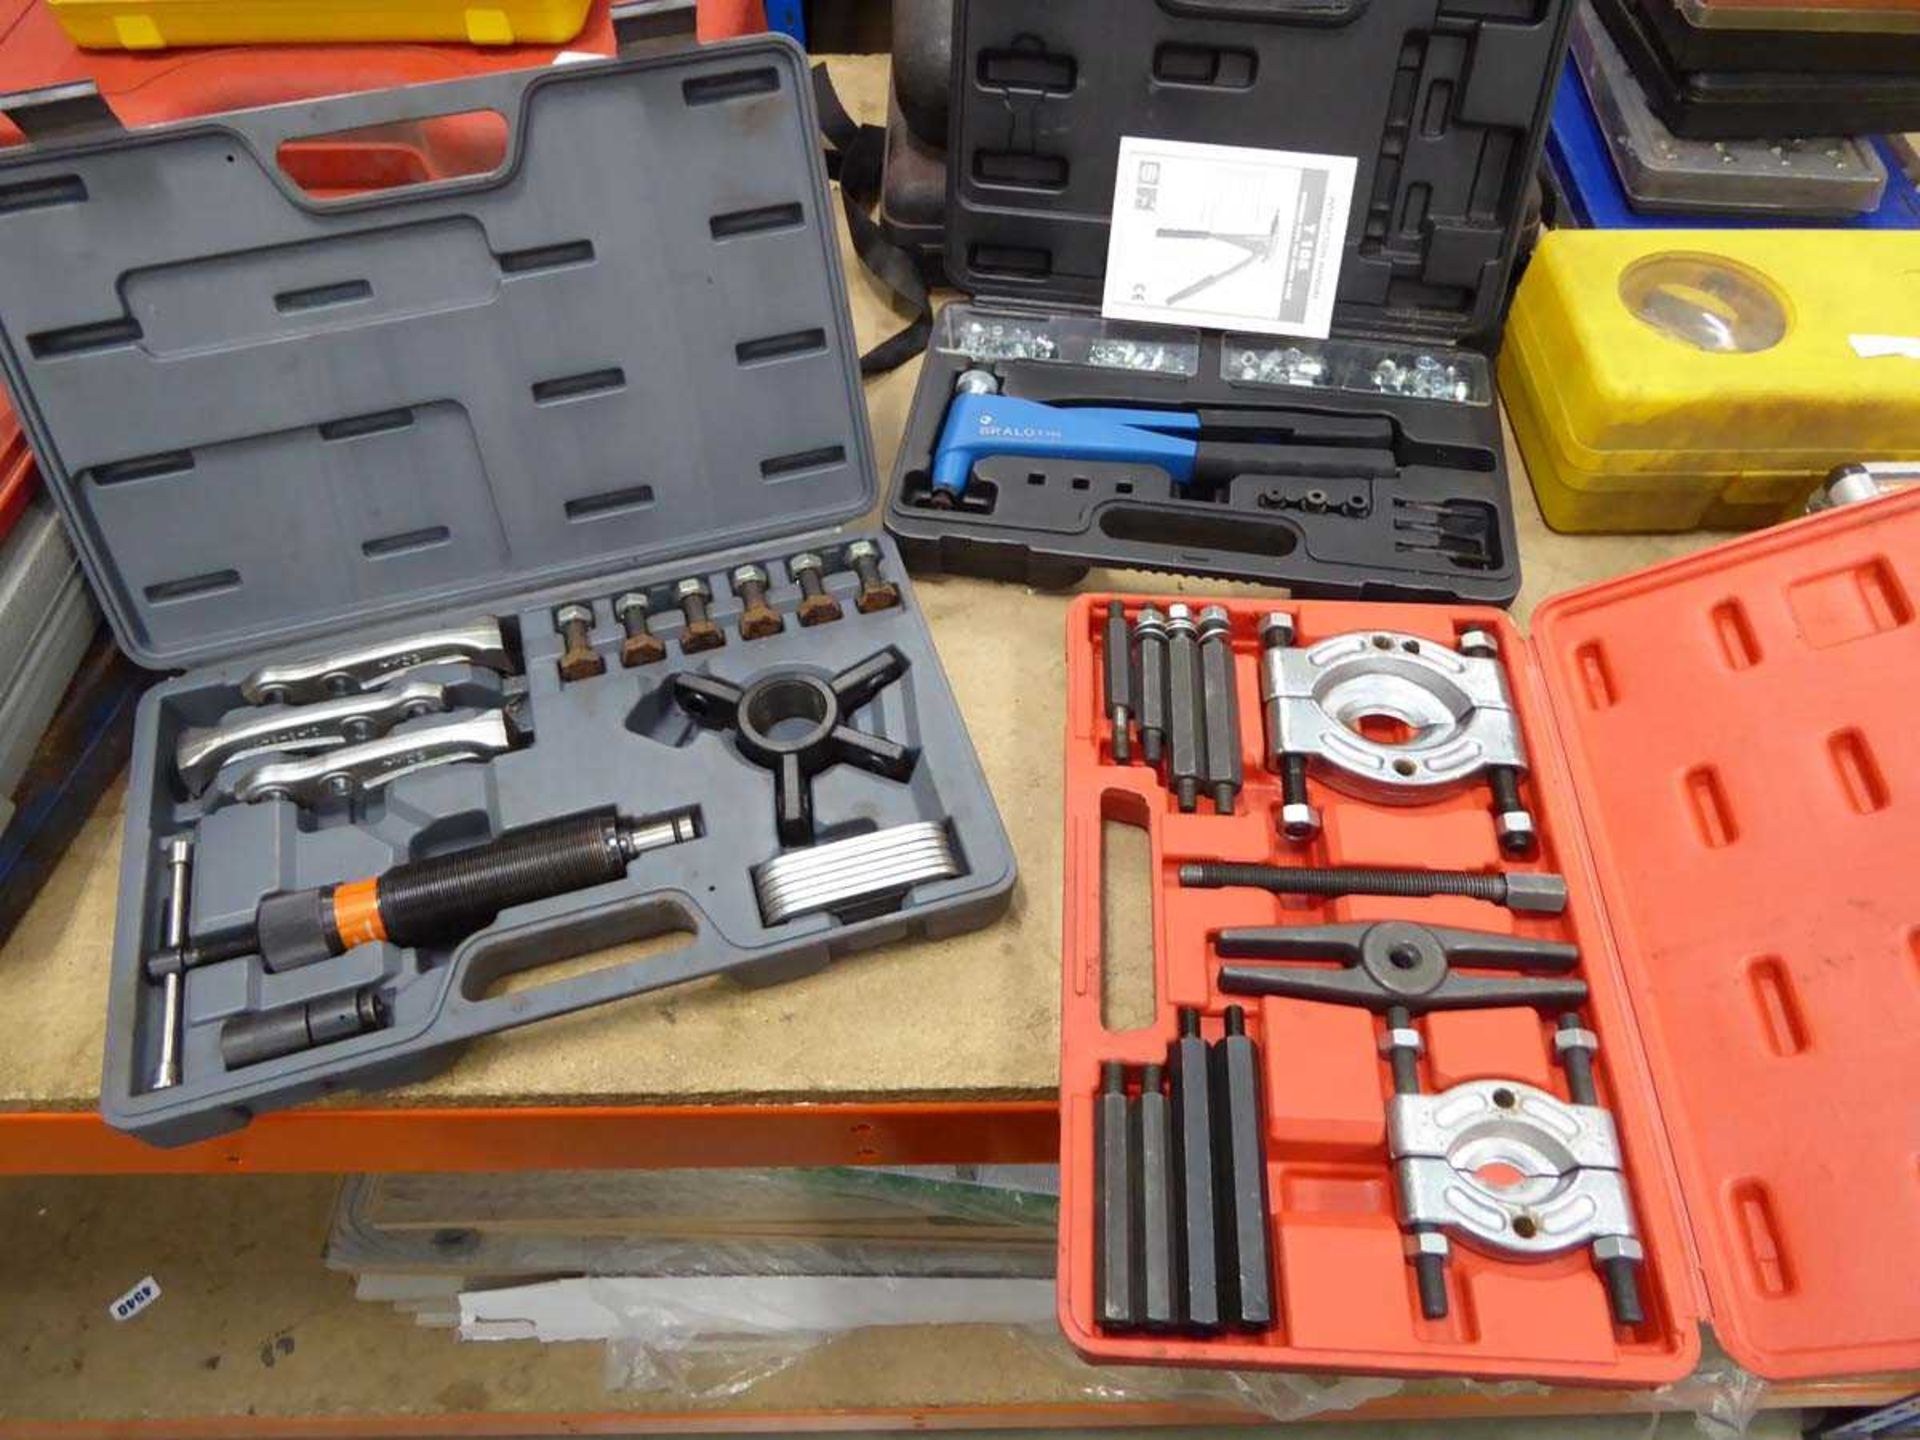 Bralo riveting tool set, Draper puller kit and a red boxed puller kit